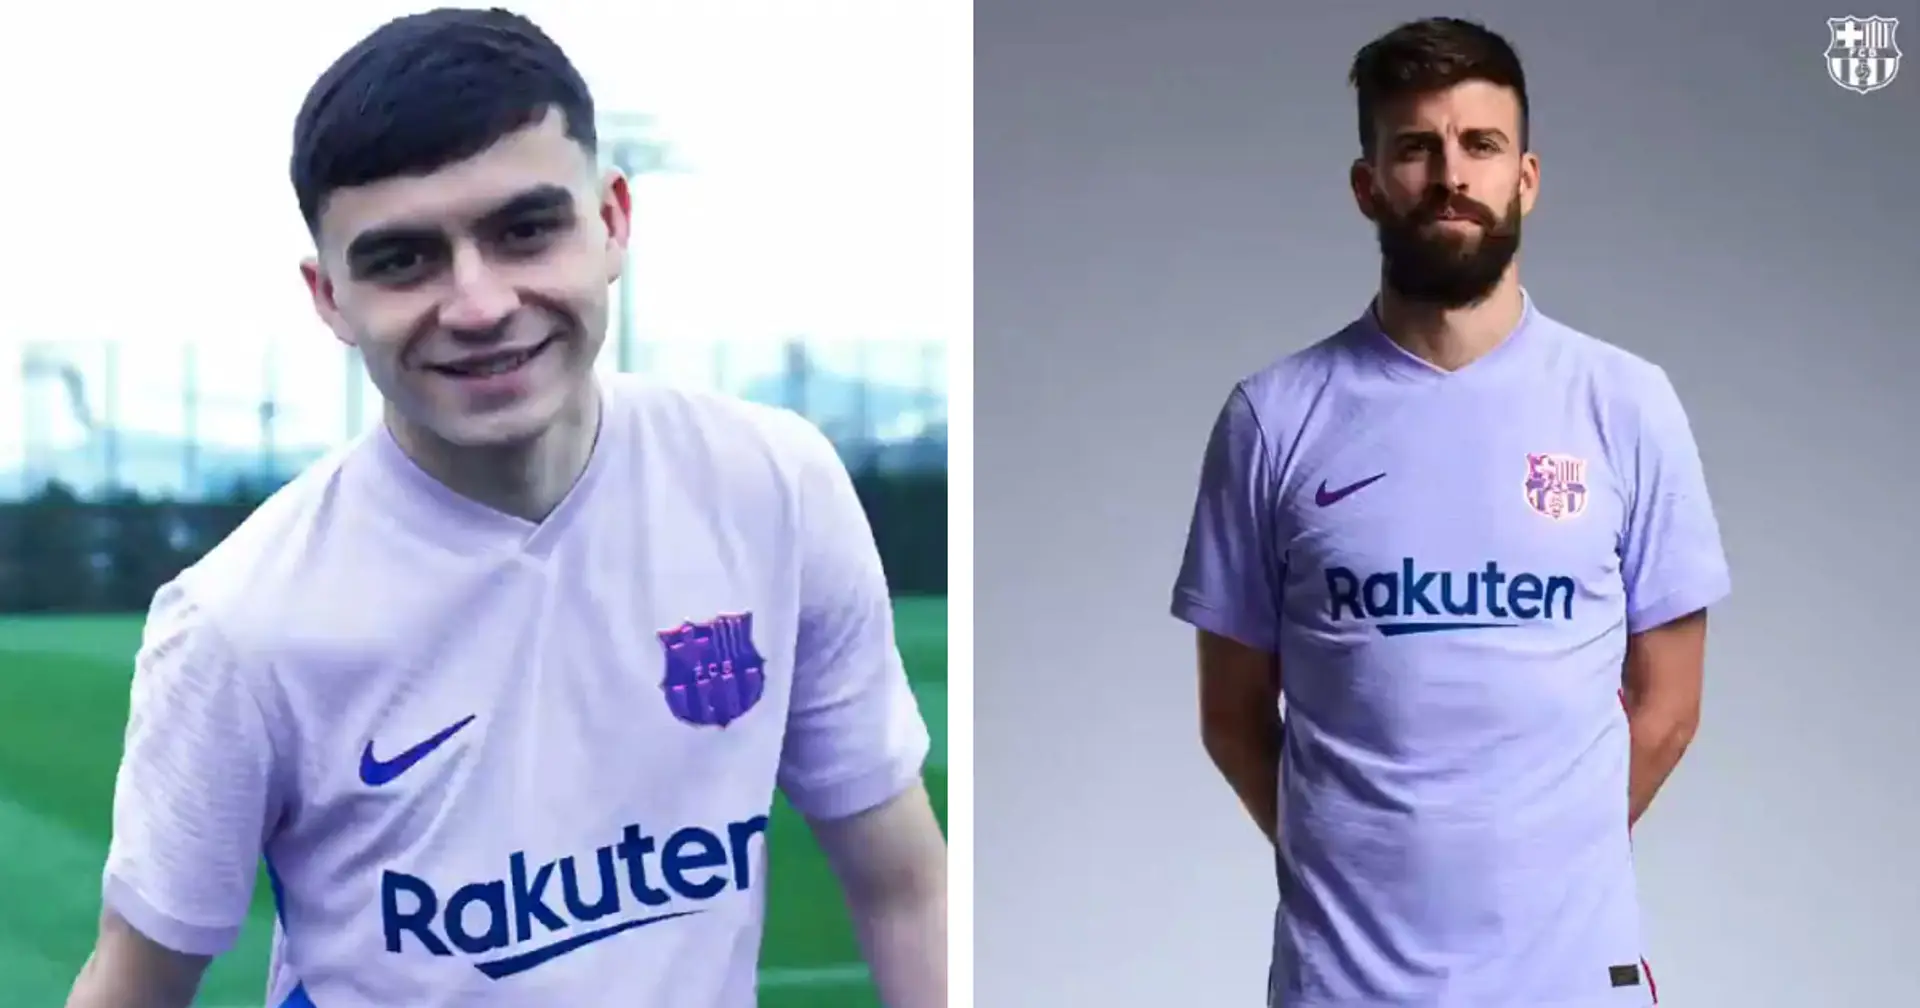 OFFICIAL: Barca unveil away kit for 2021/22 season